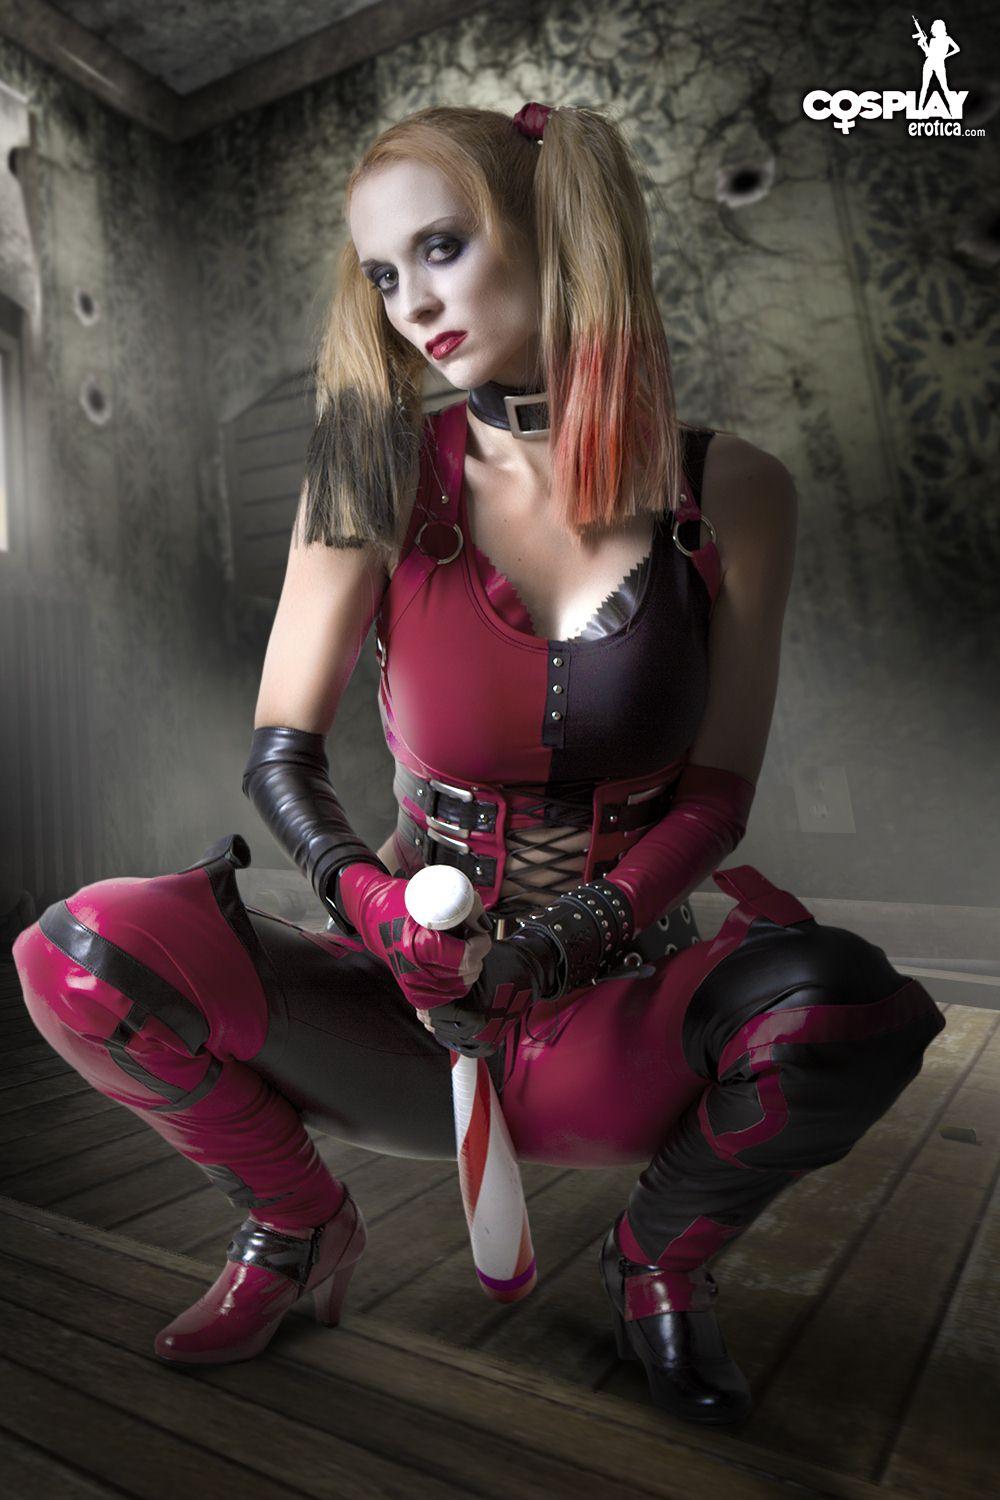 Pictures of sexy cosplayer Lana dressed as Harley Quinn from Arkham City #58814863